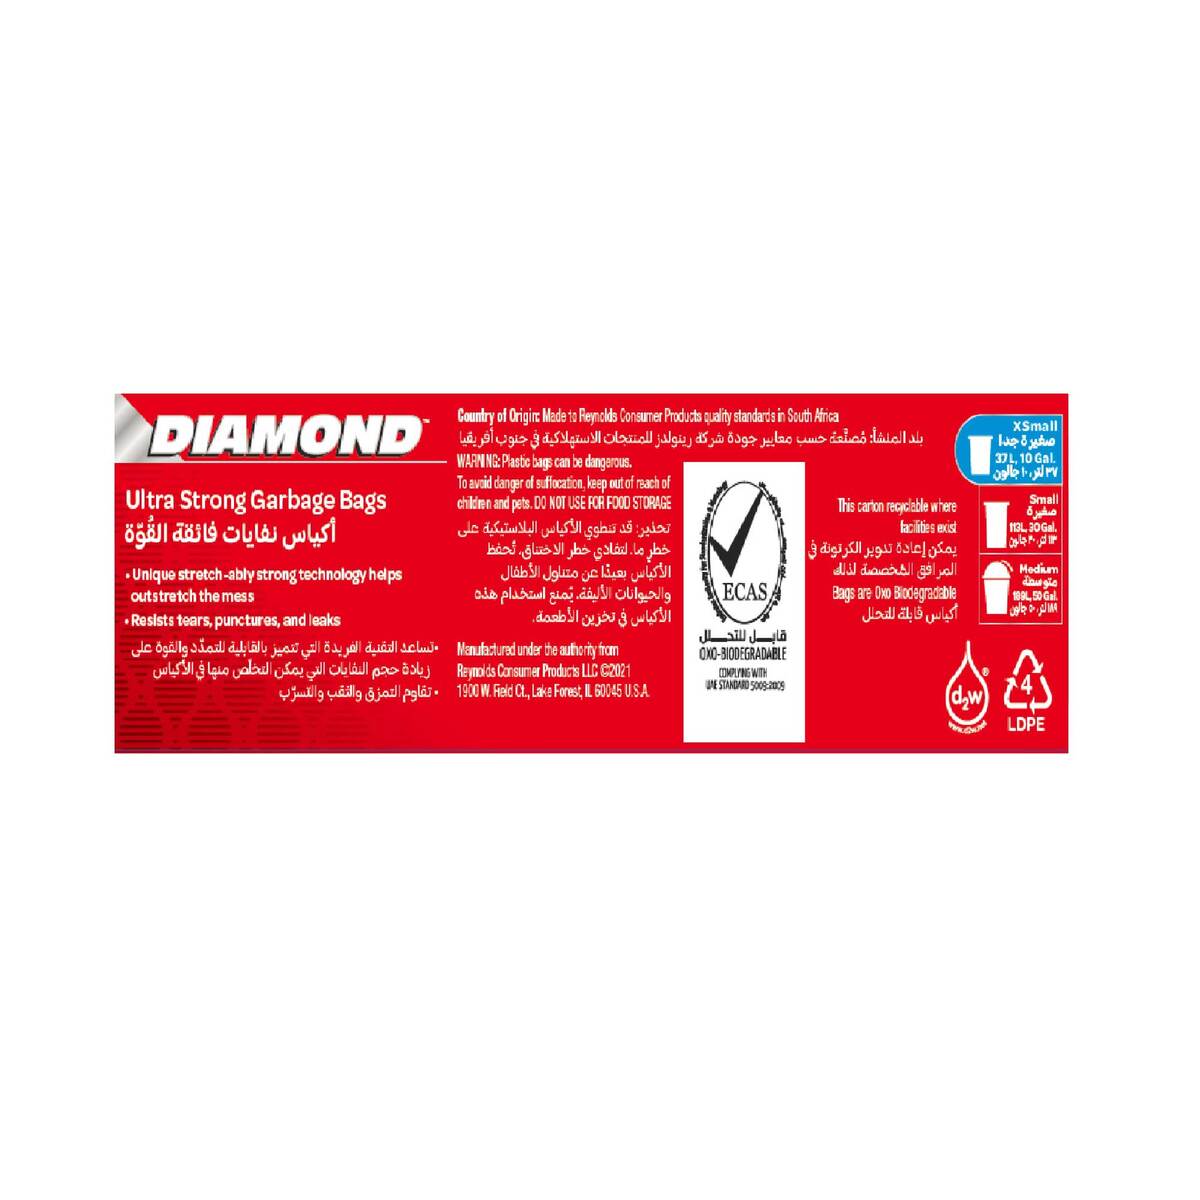 Diamond Garbage Bags Ultra Strong X-Small Size, 56 x 56cm, 20 pcs